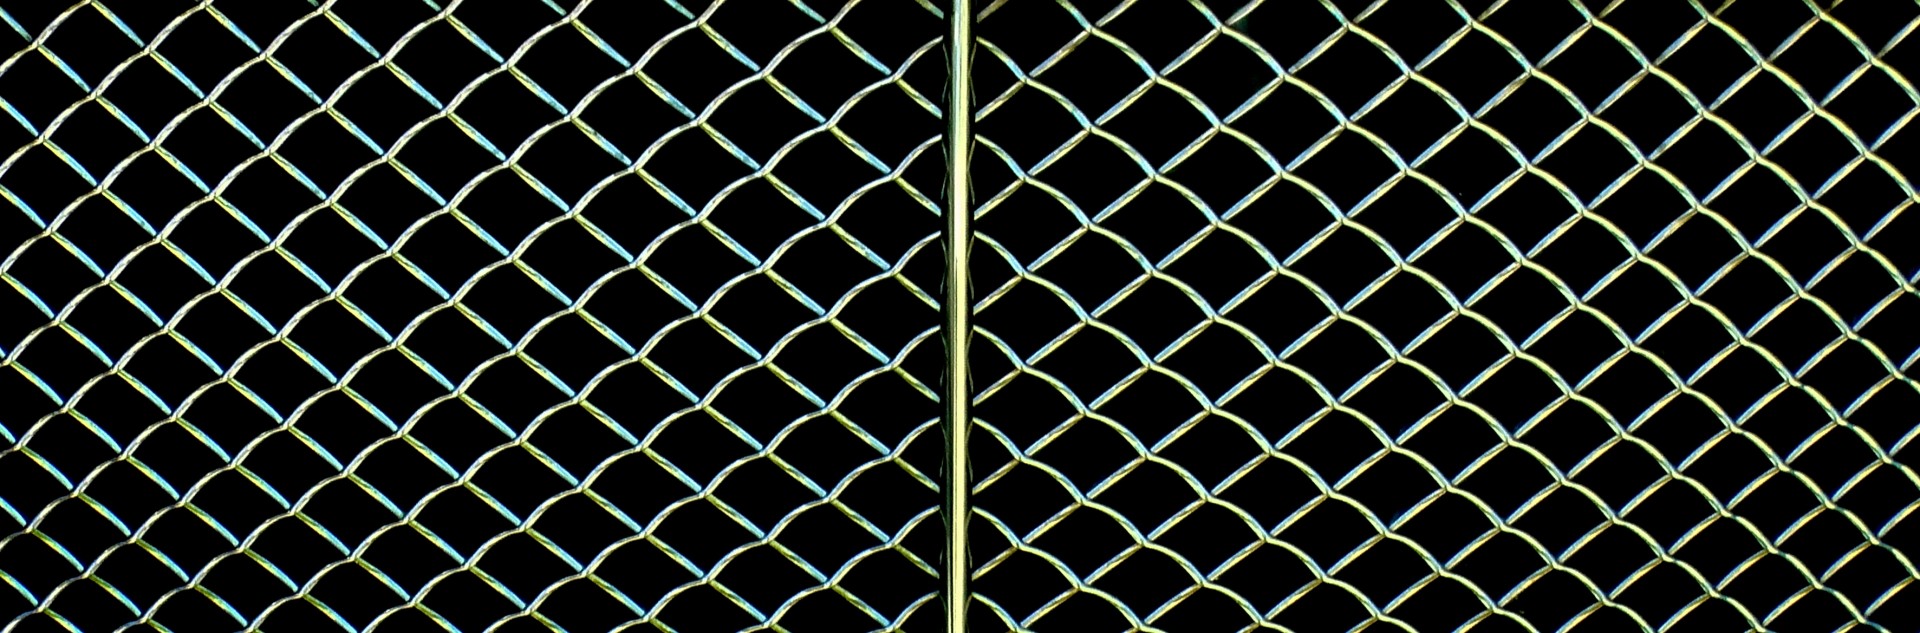 bentley grille grill free photo